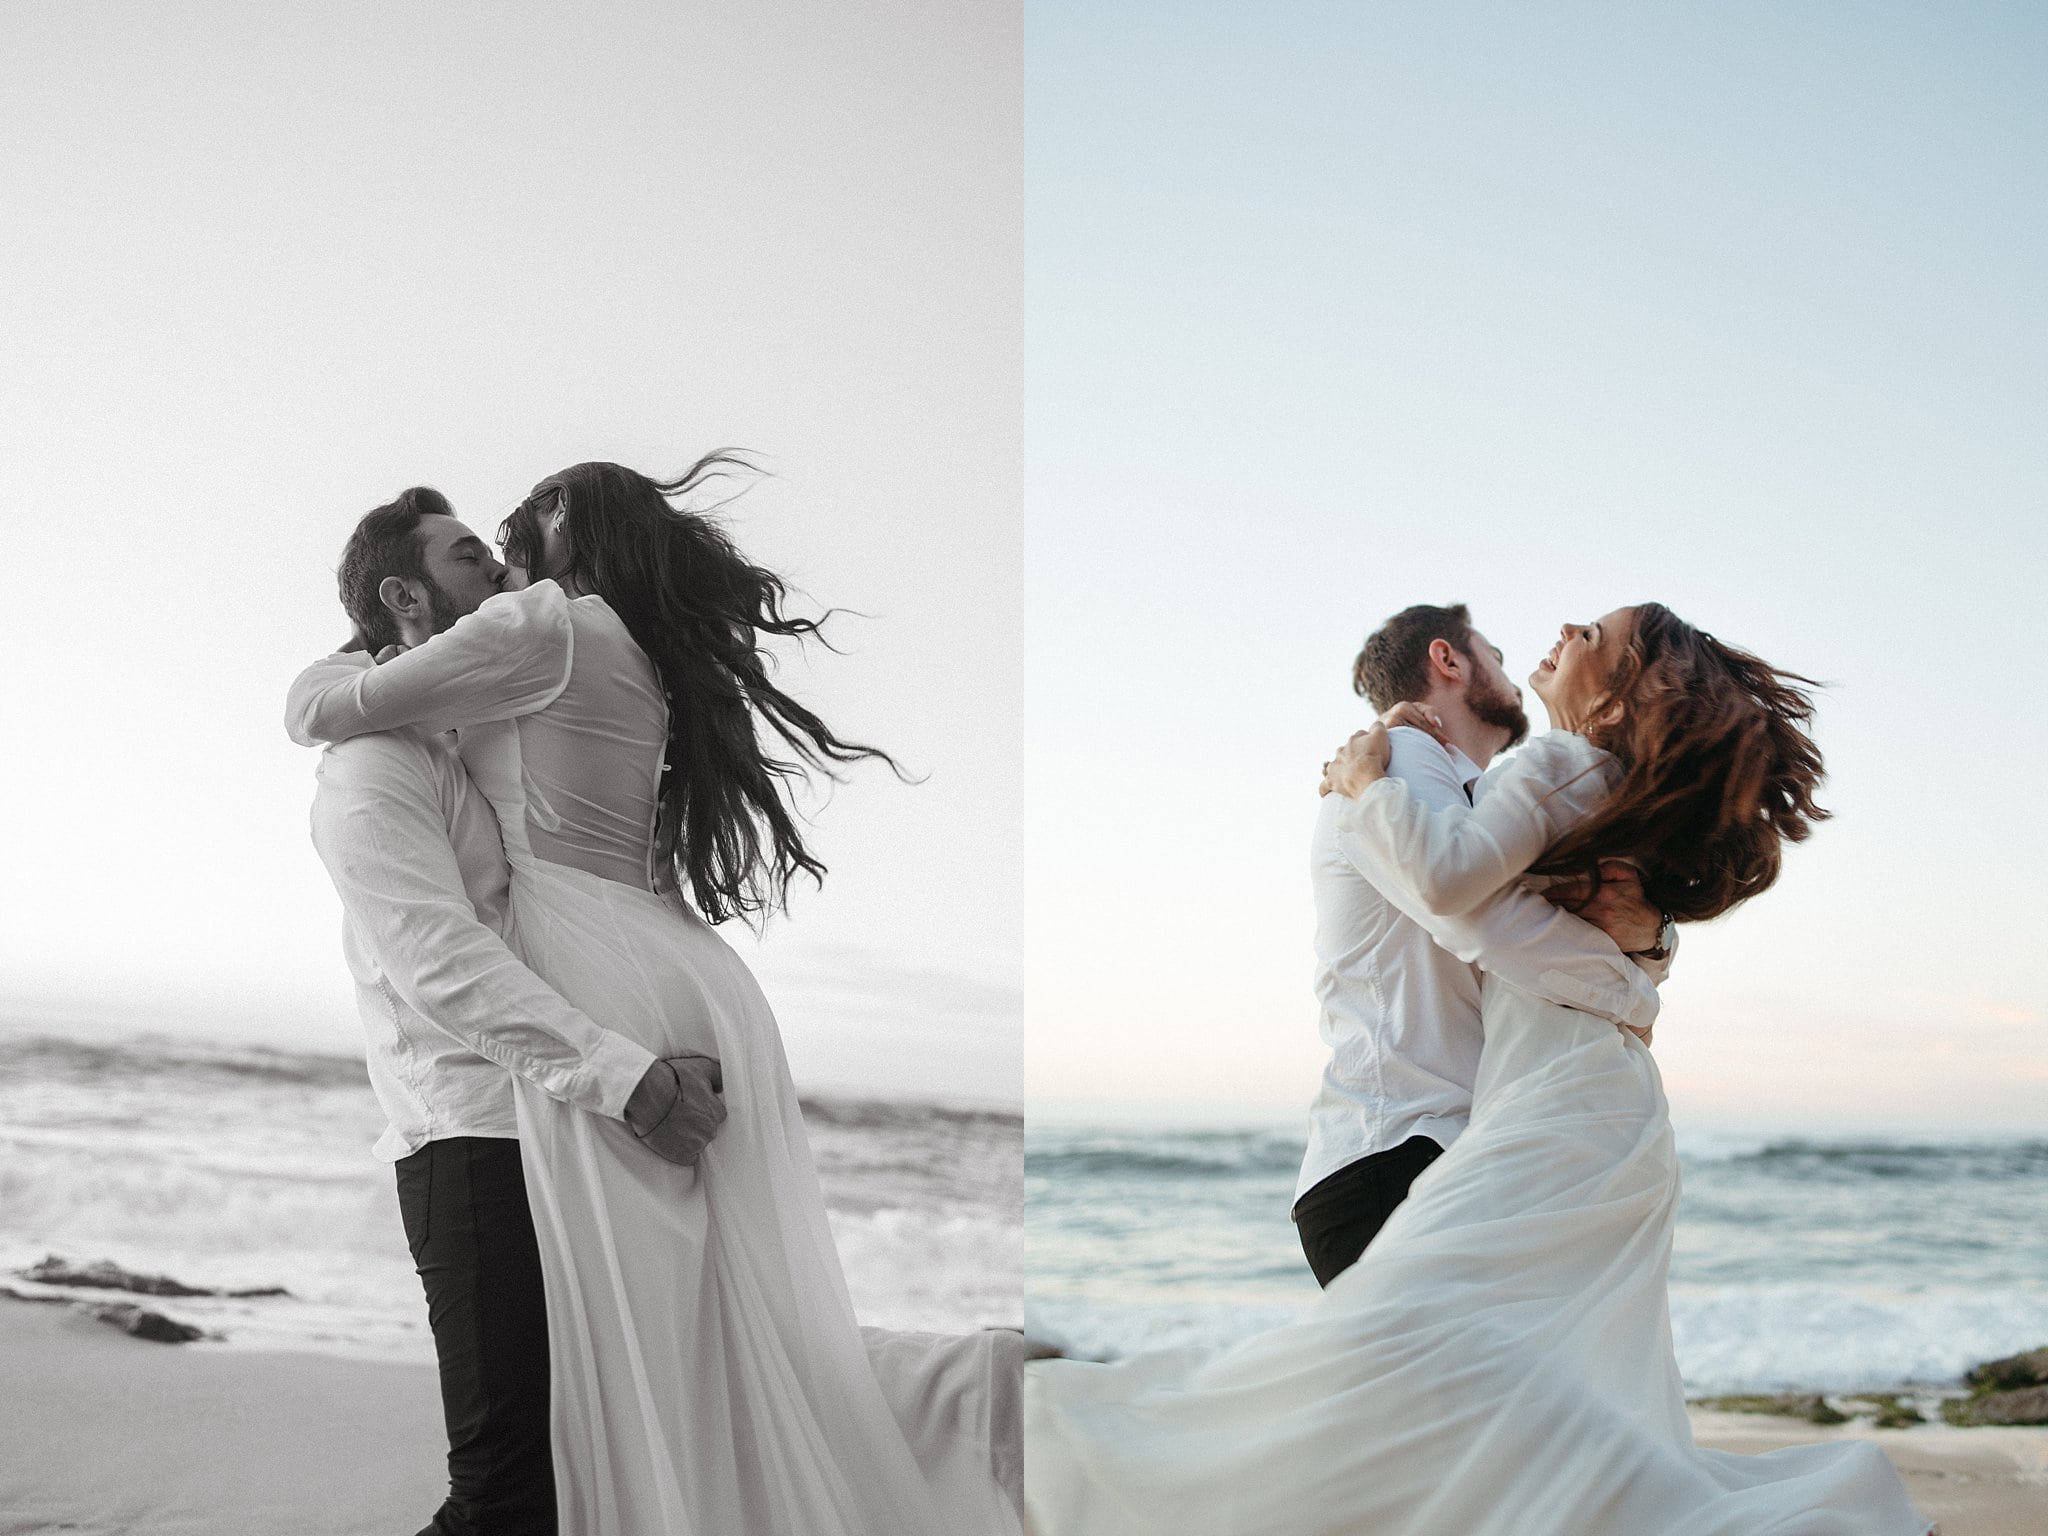 couple embracing in passionate hug by shore break